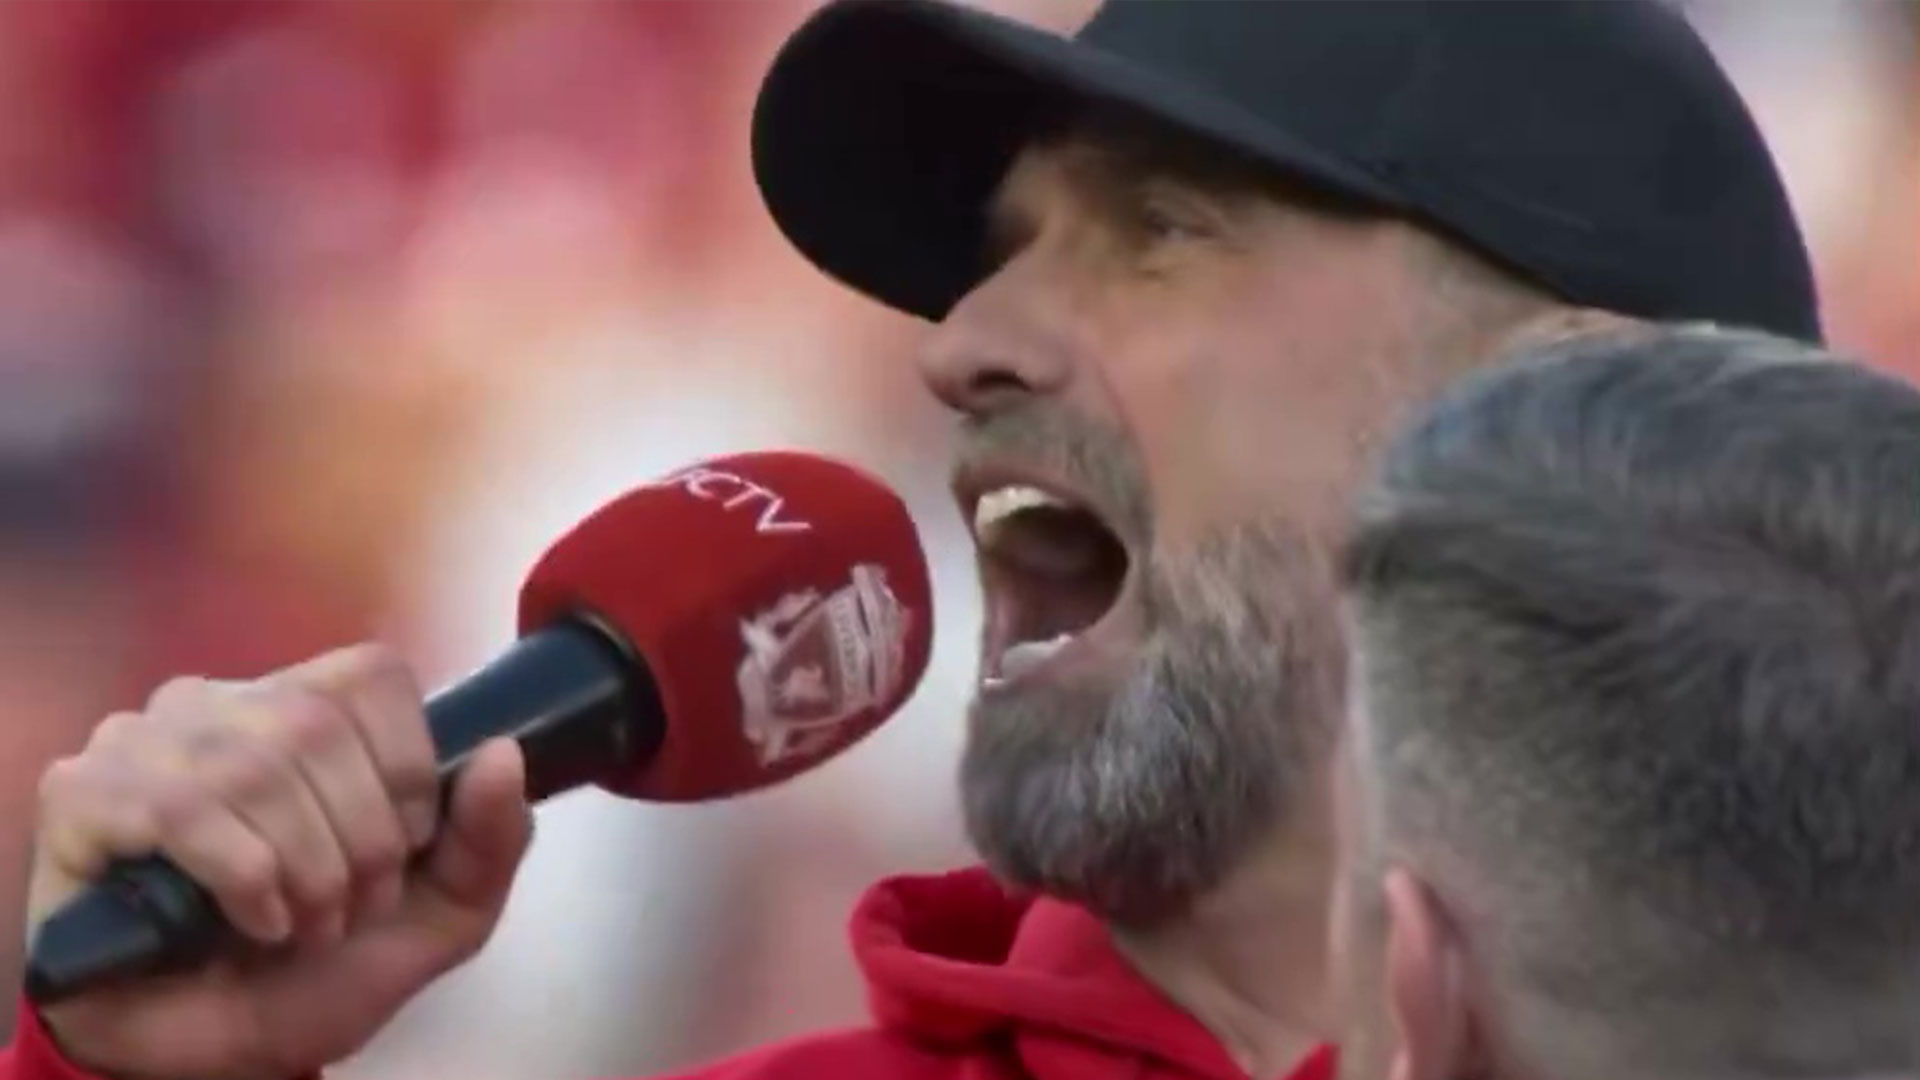 Watch Jurgen Klopp announce Arne Slot as next Liverpool manager with amazing song to fans at Anfield [Video]